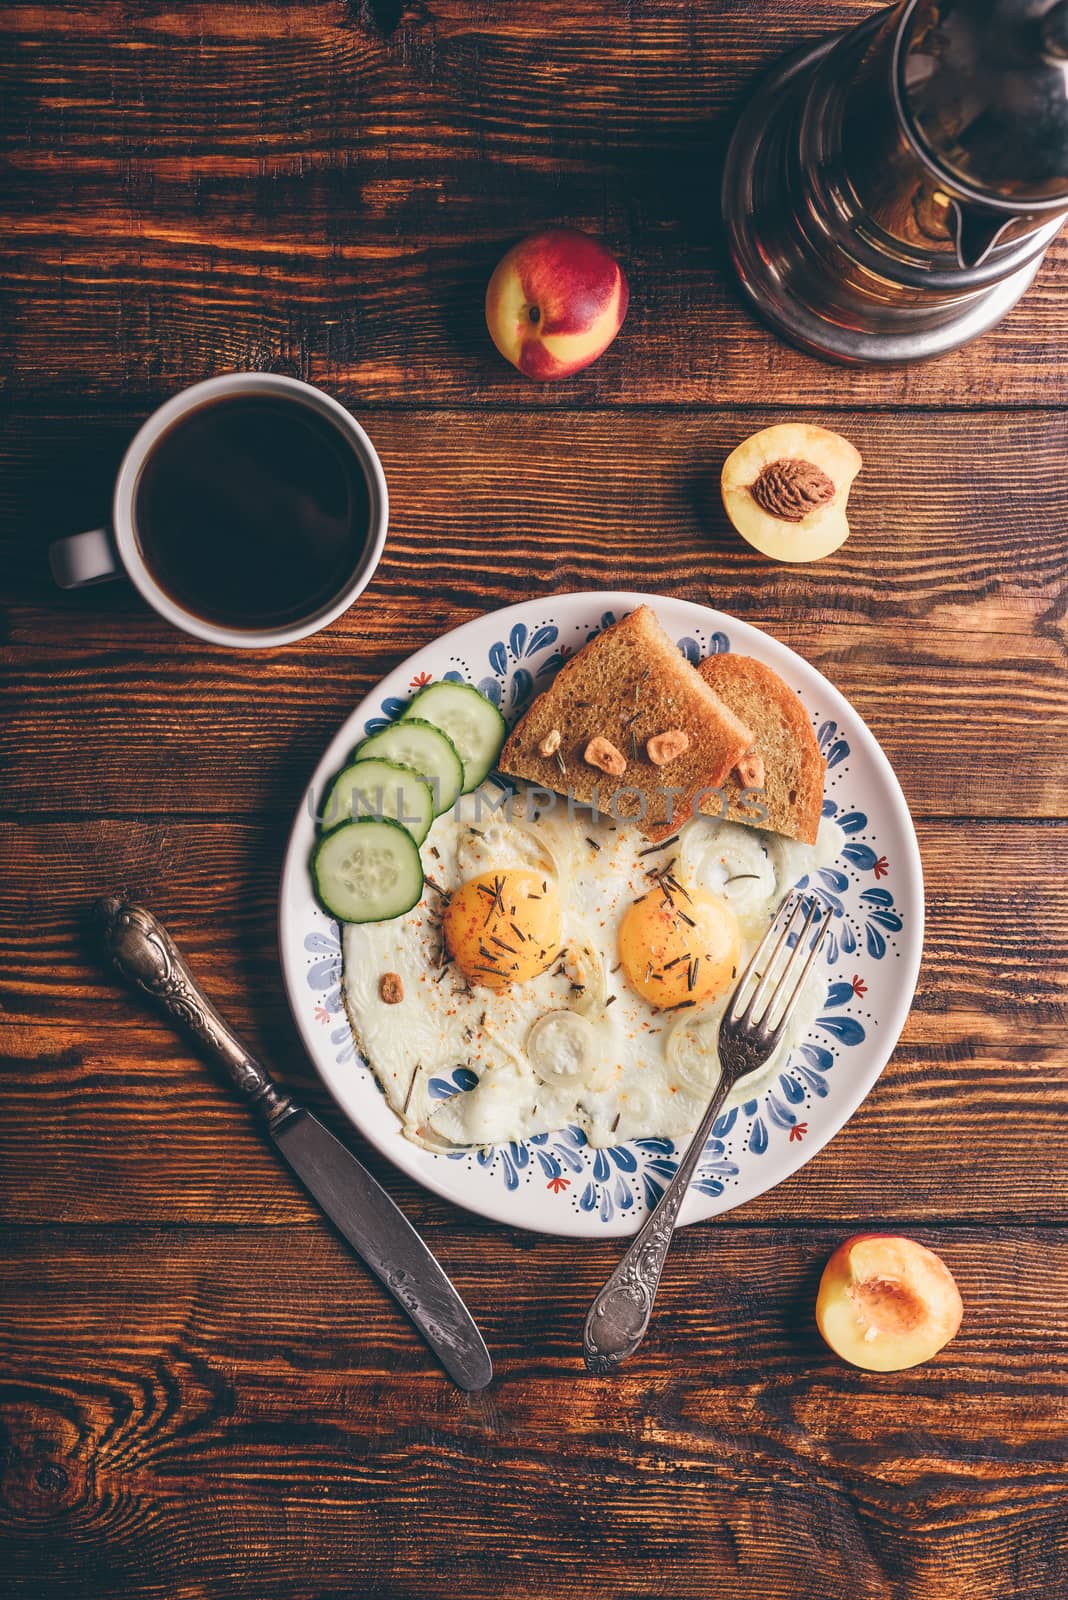 Breakfast toast with fried eggs with vegetables on plate and cup of coffee with fruits over dark wooden background, top view. Clean eating concept.